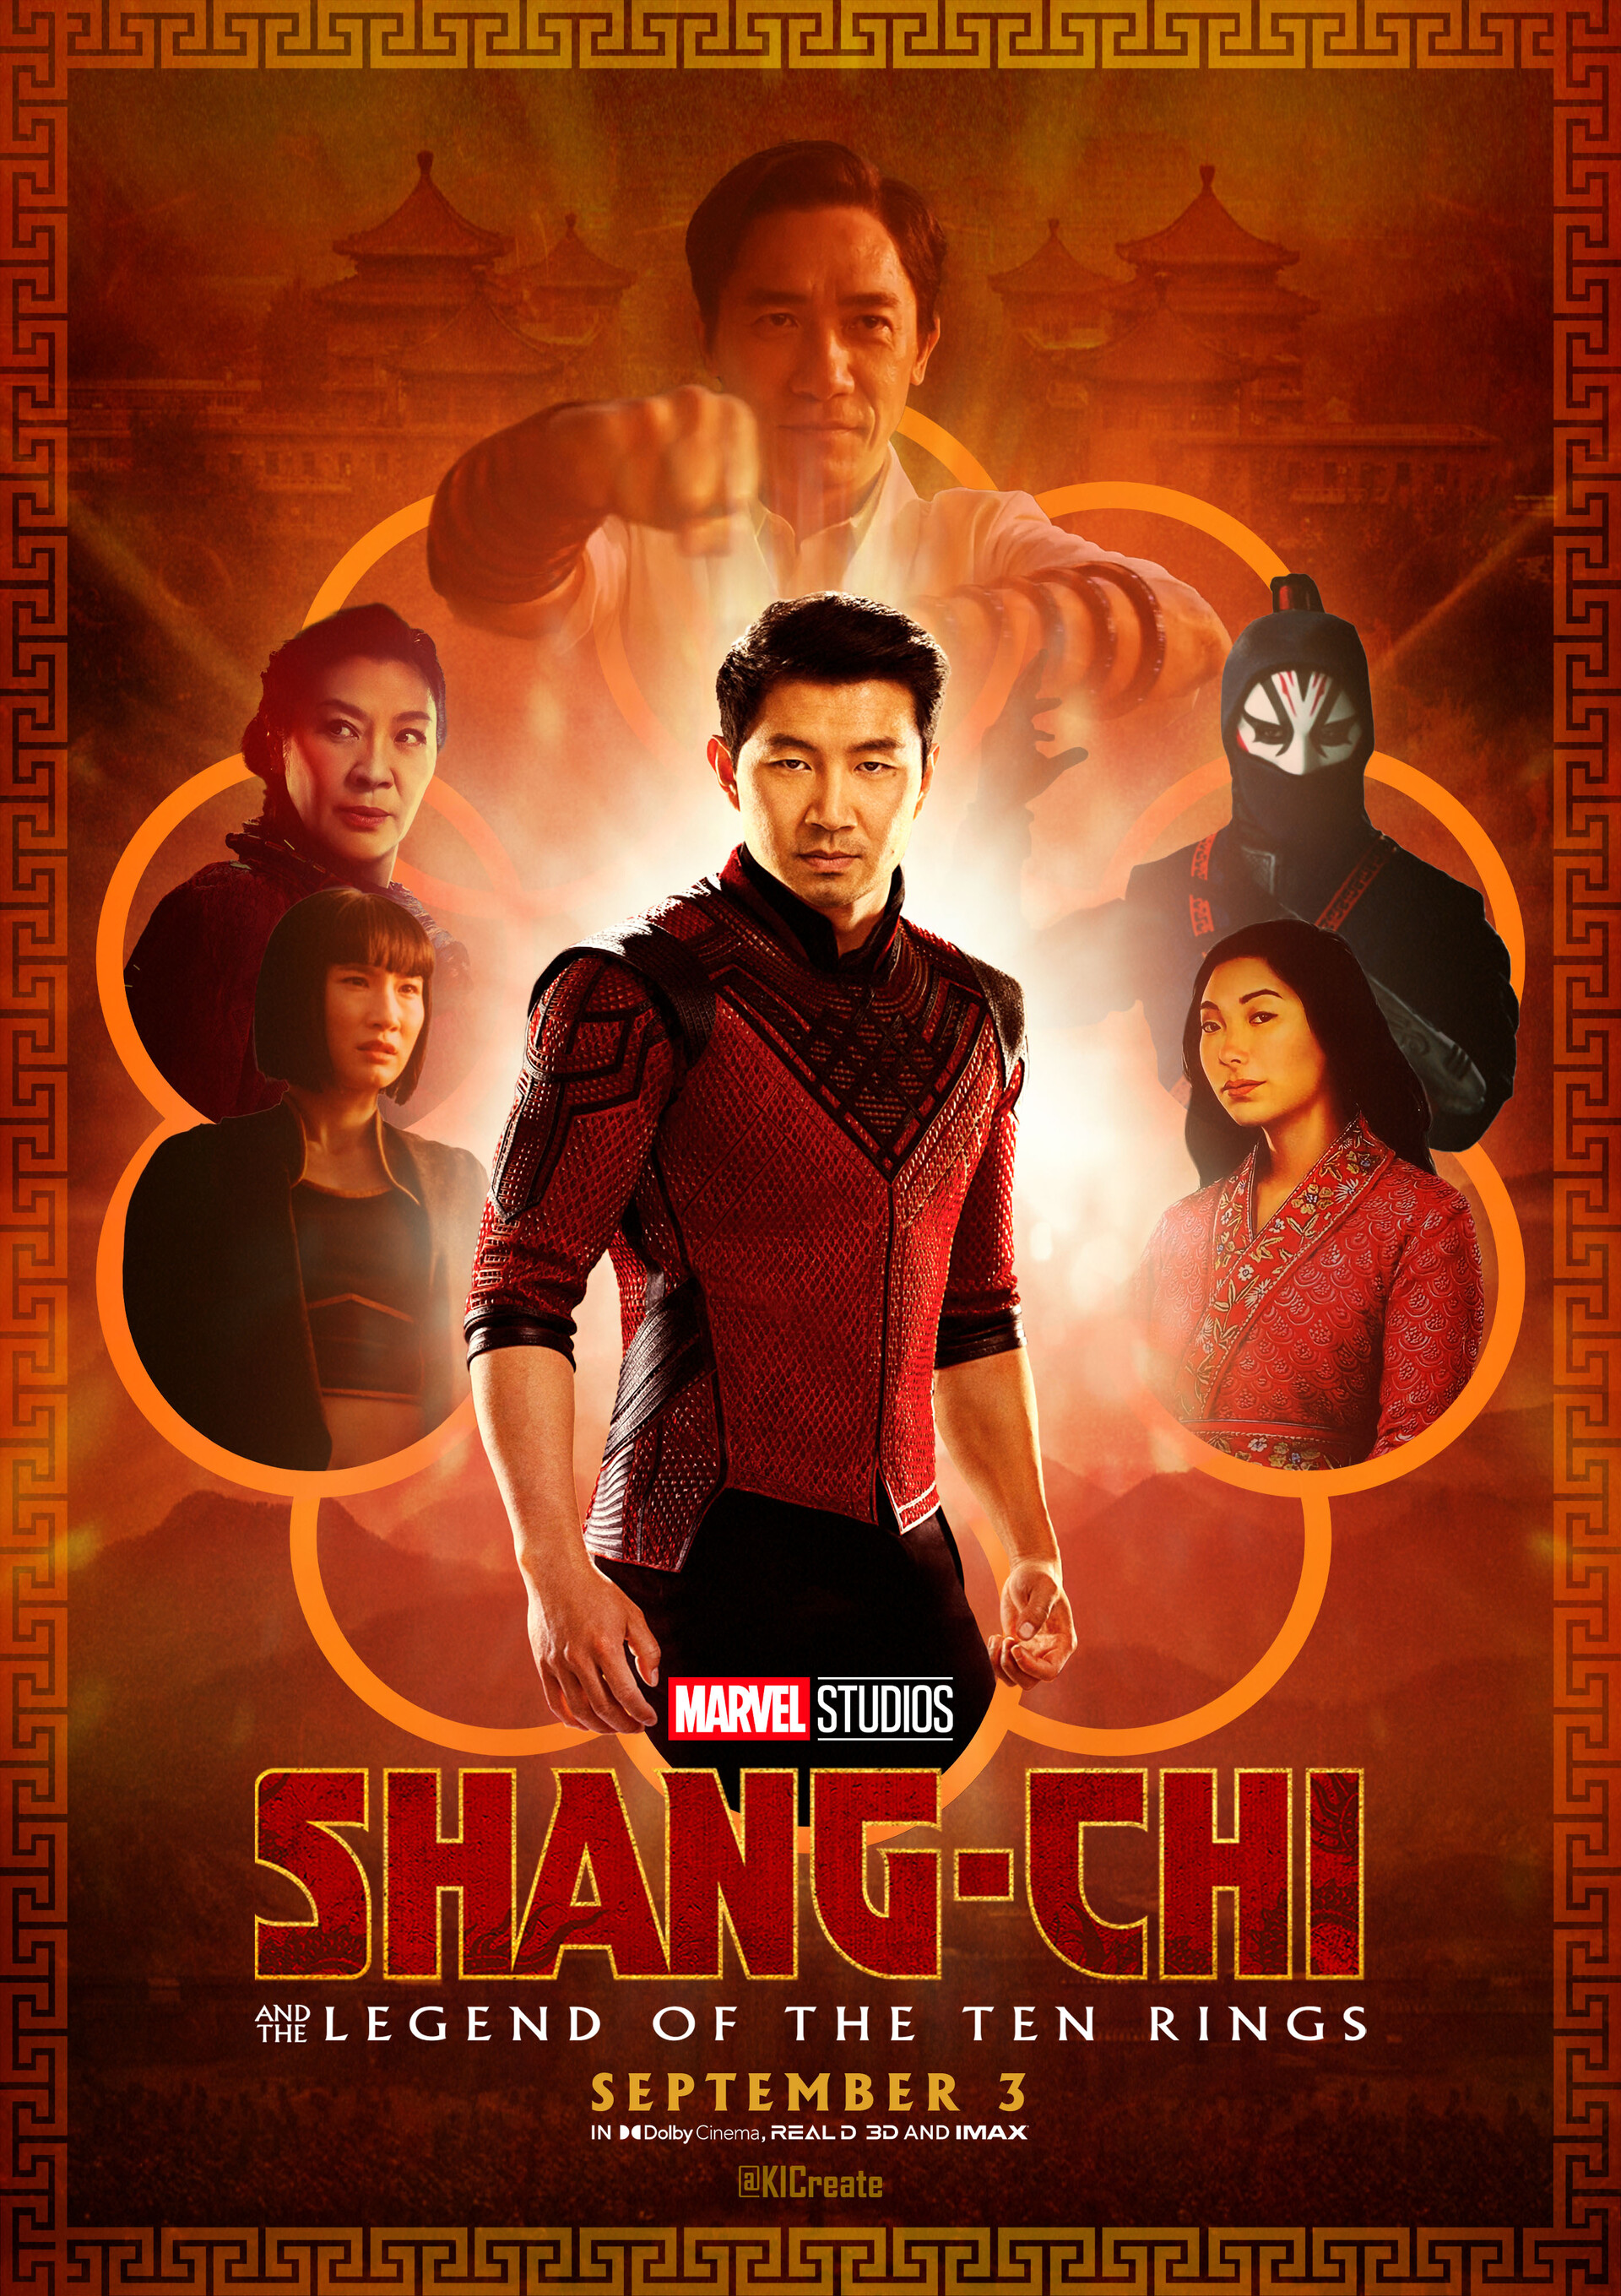 ArtStation - Shang-Chi and the Legend of the Ten Rings Fanart Poster, Keane  Ip